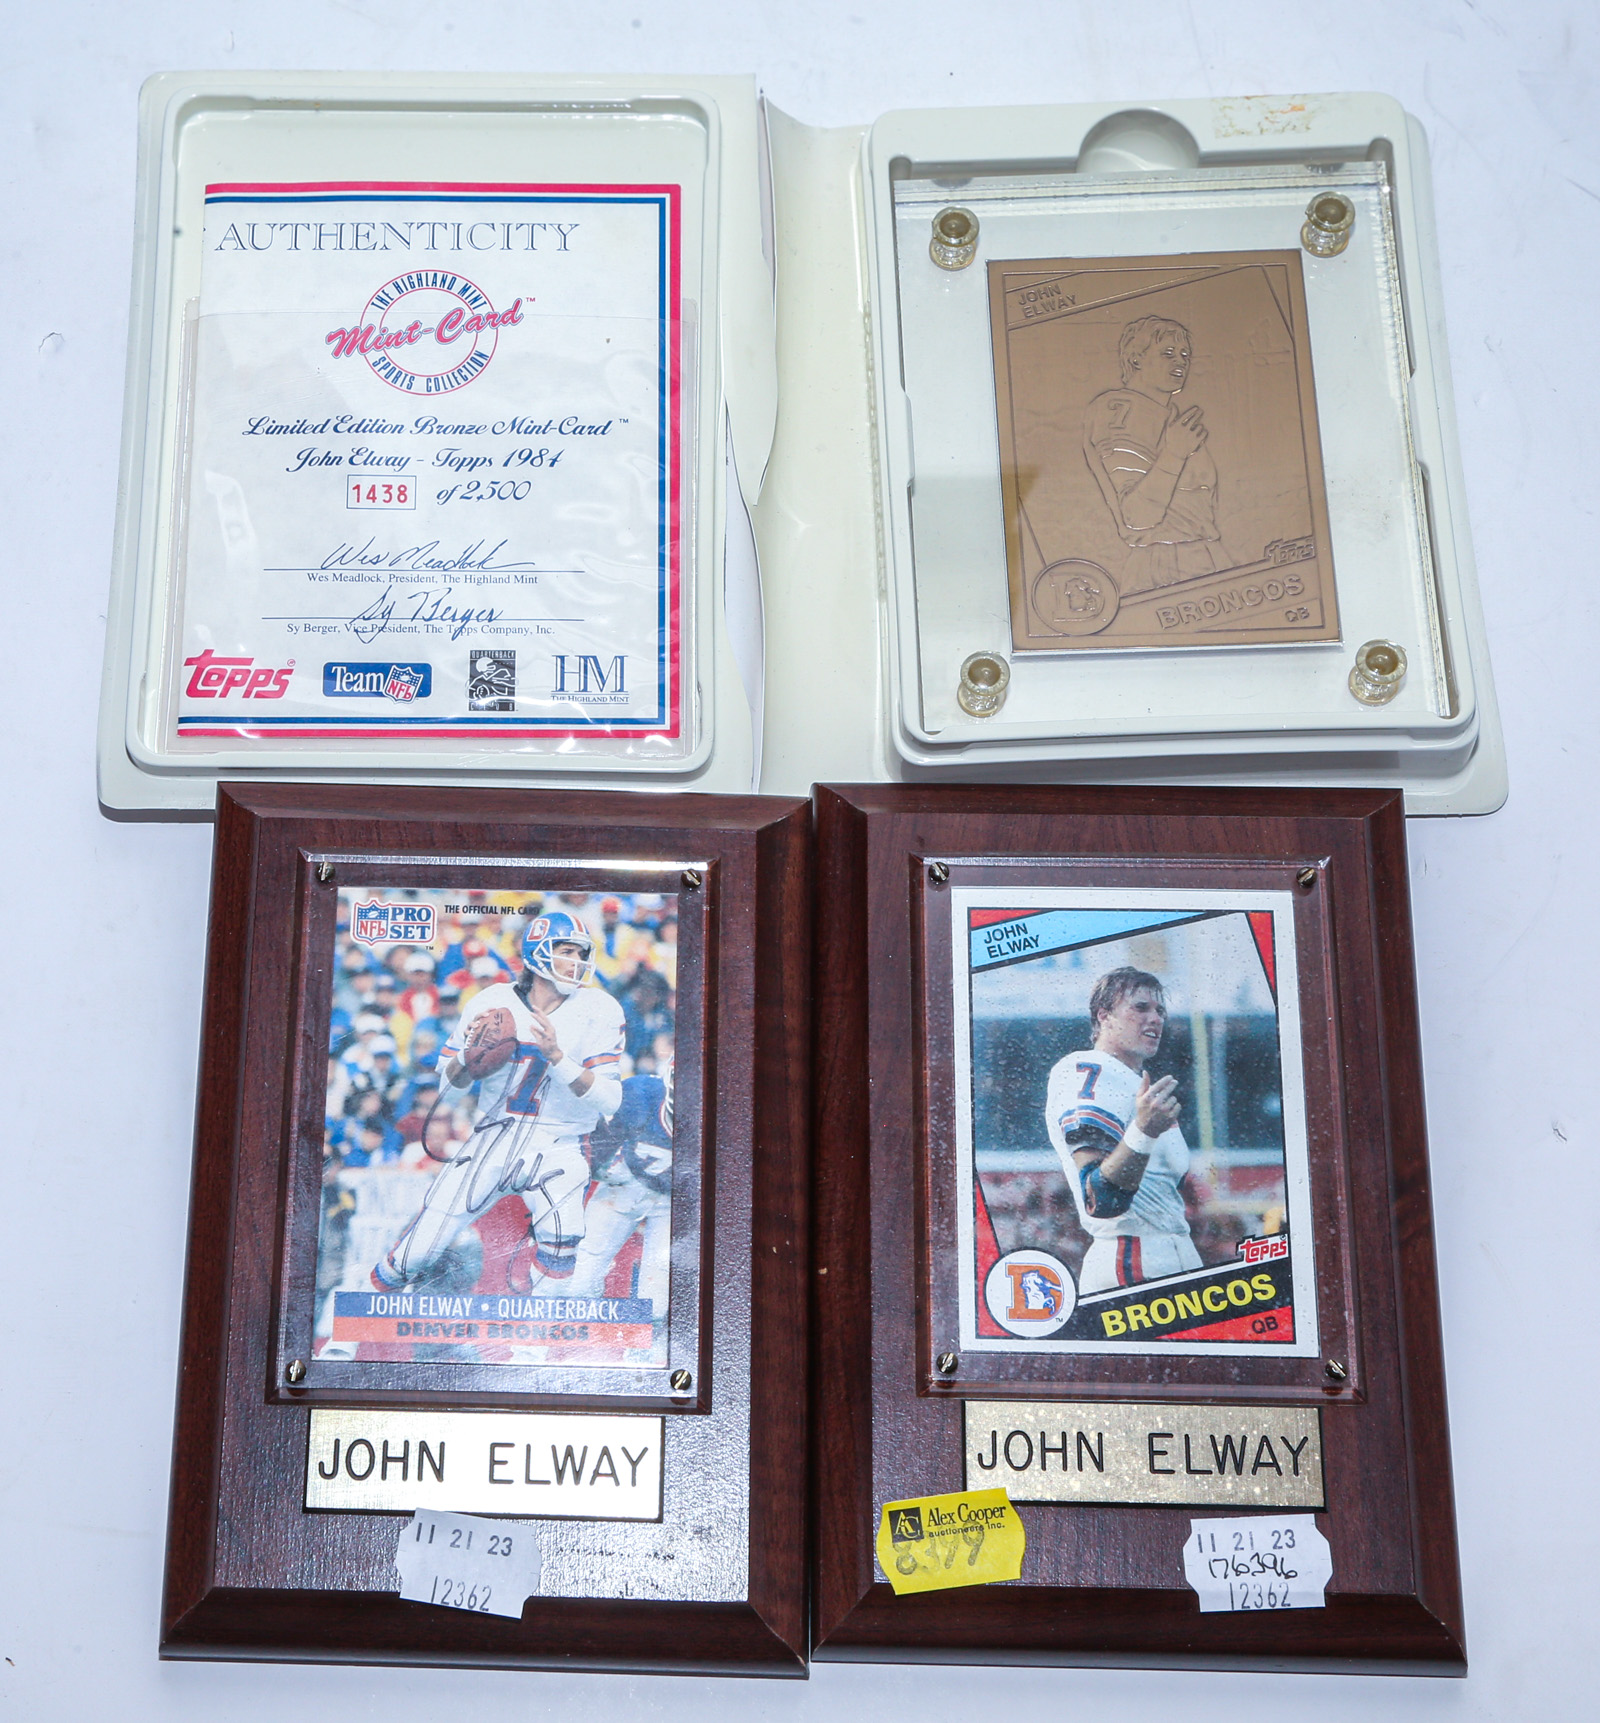 THREE JOHN ELWAY CARDS TWO PLAQUE 3caf85